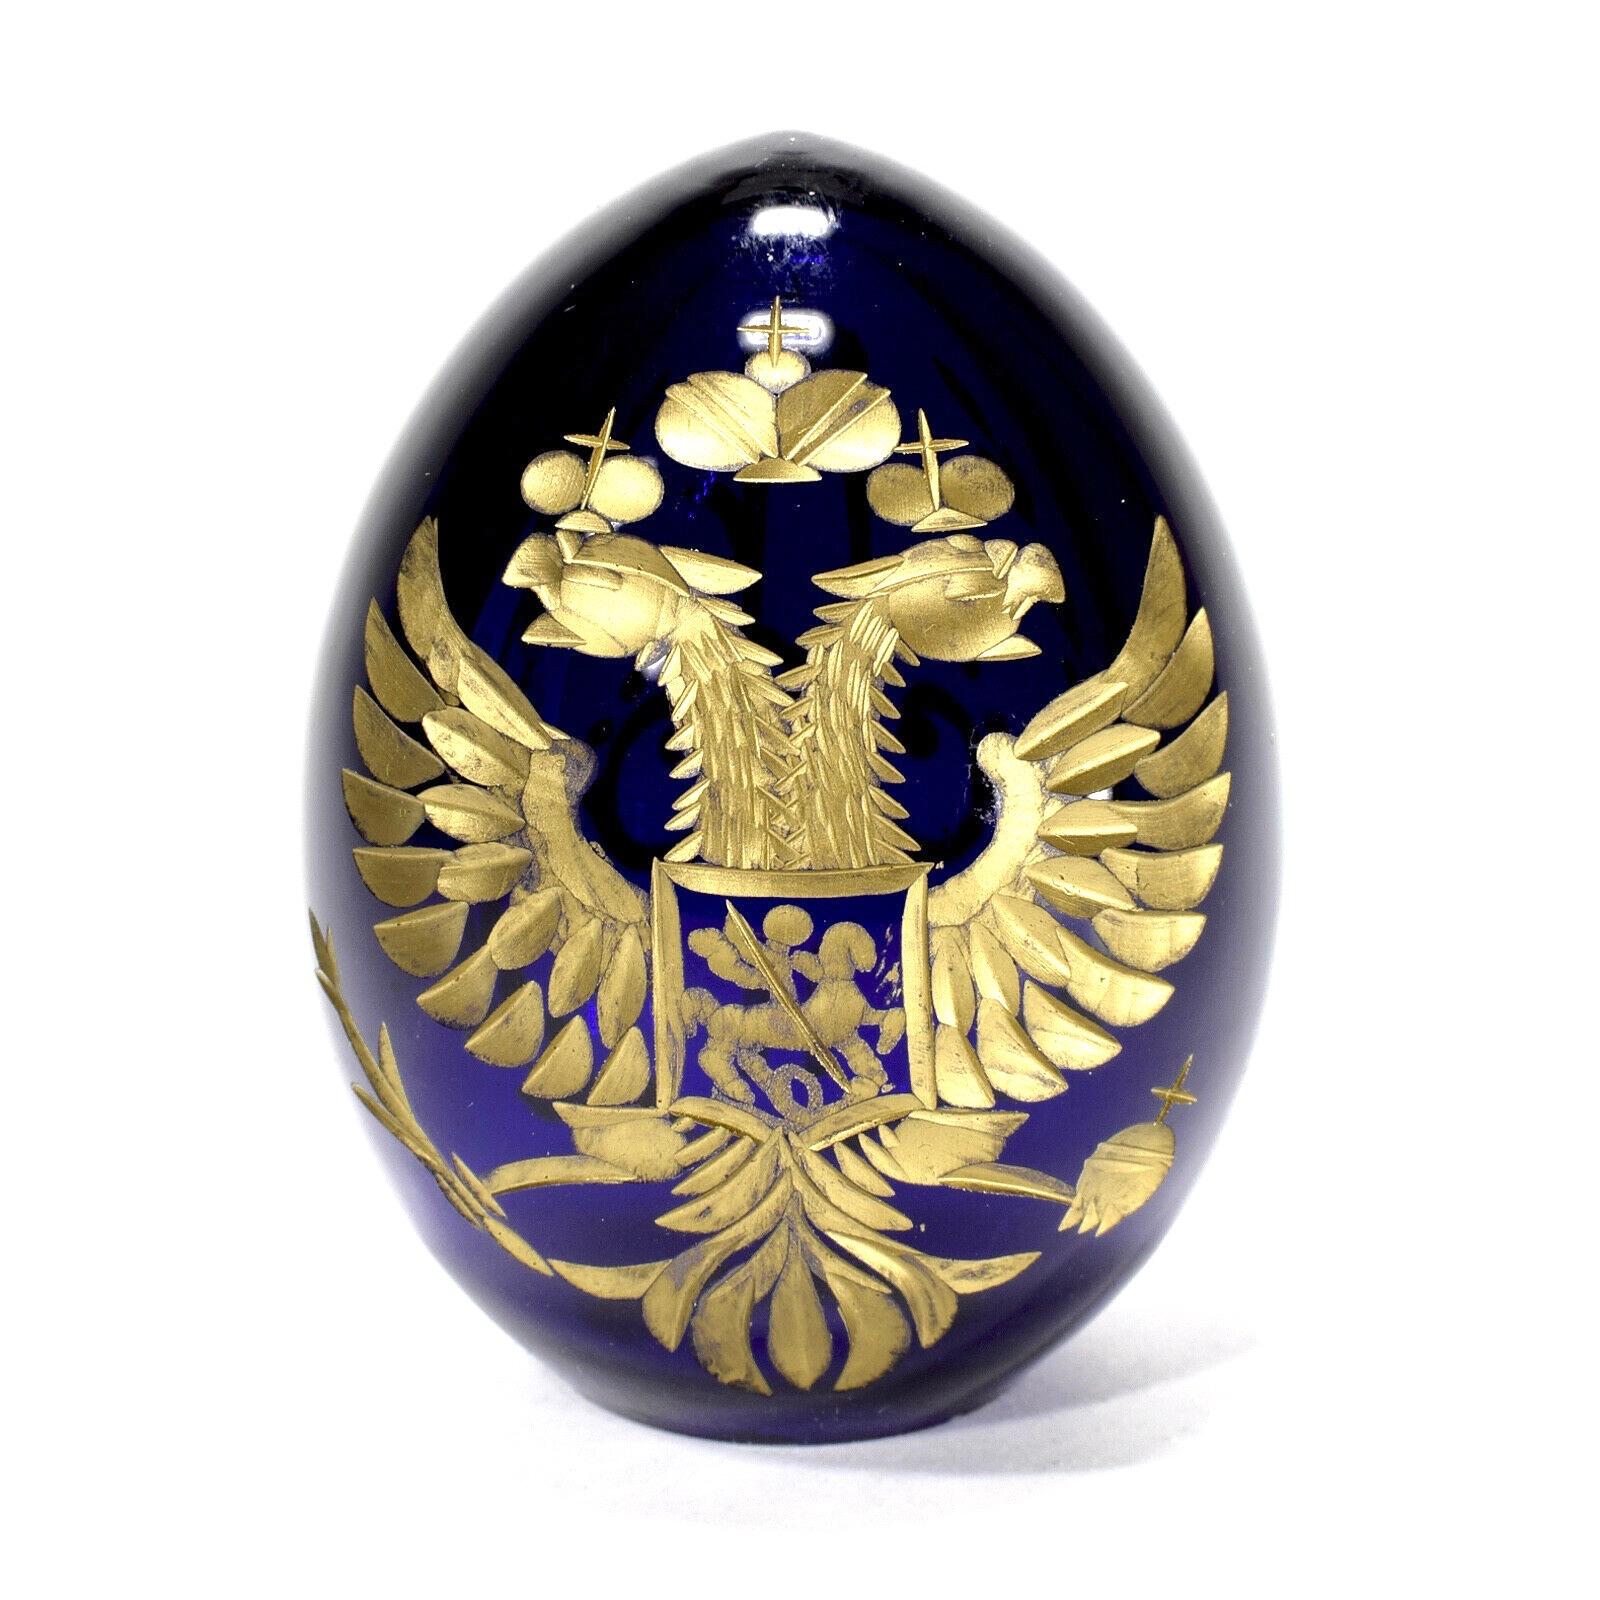 Vintage Faberge style Russia glass egg with etched Russian coat of arms. Reminiscent of eggs from St. Petersburg. Nice addition to your collection or just as decorative piece.